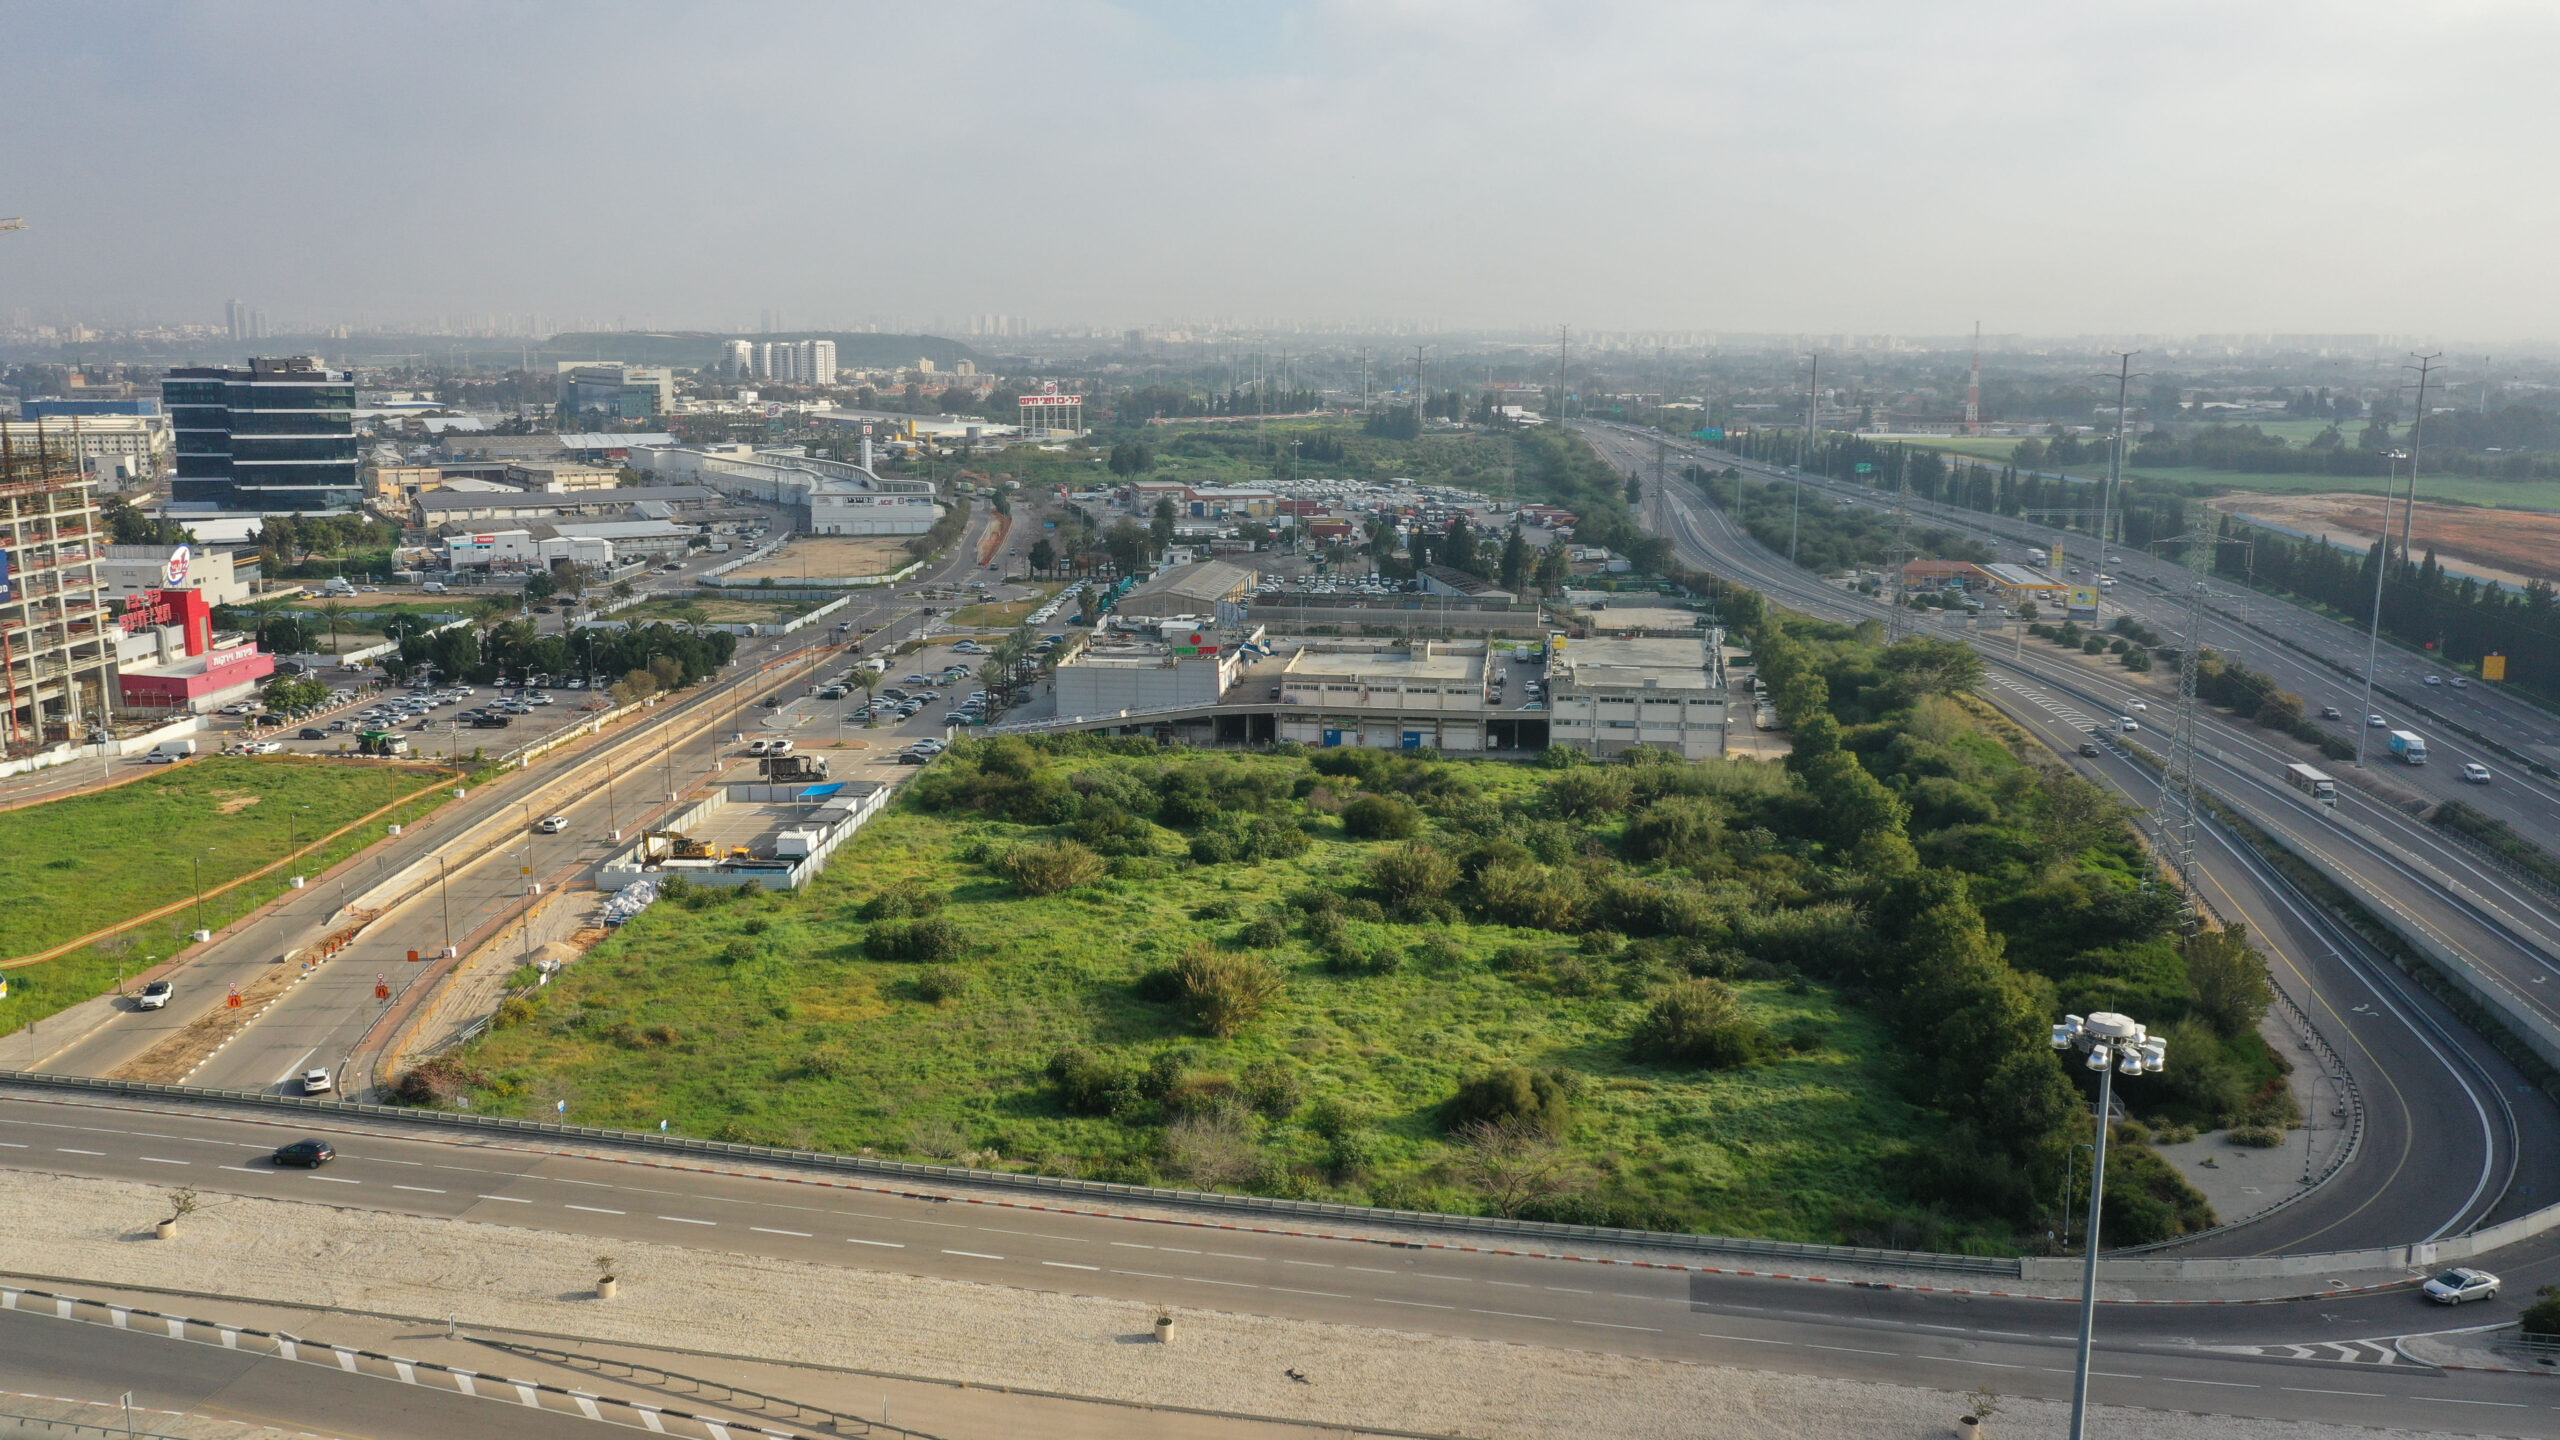 HaMerkava: Strategically positioned compound near major transportation routes, sold in 2021 | Reality the Leading Group of Real Estate Investment Funds in Israel